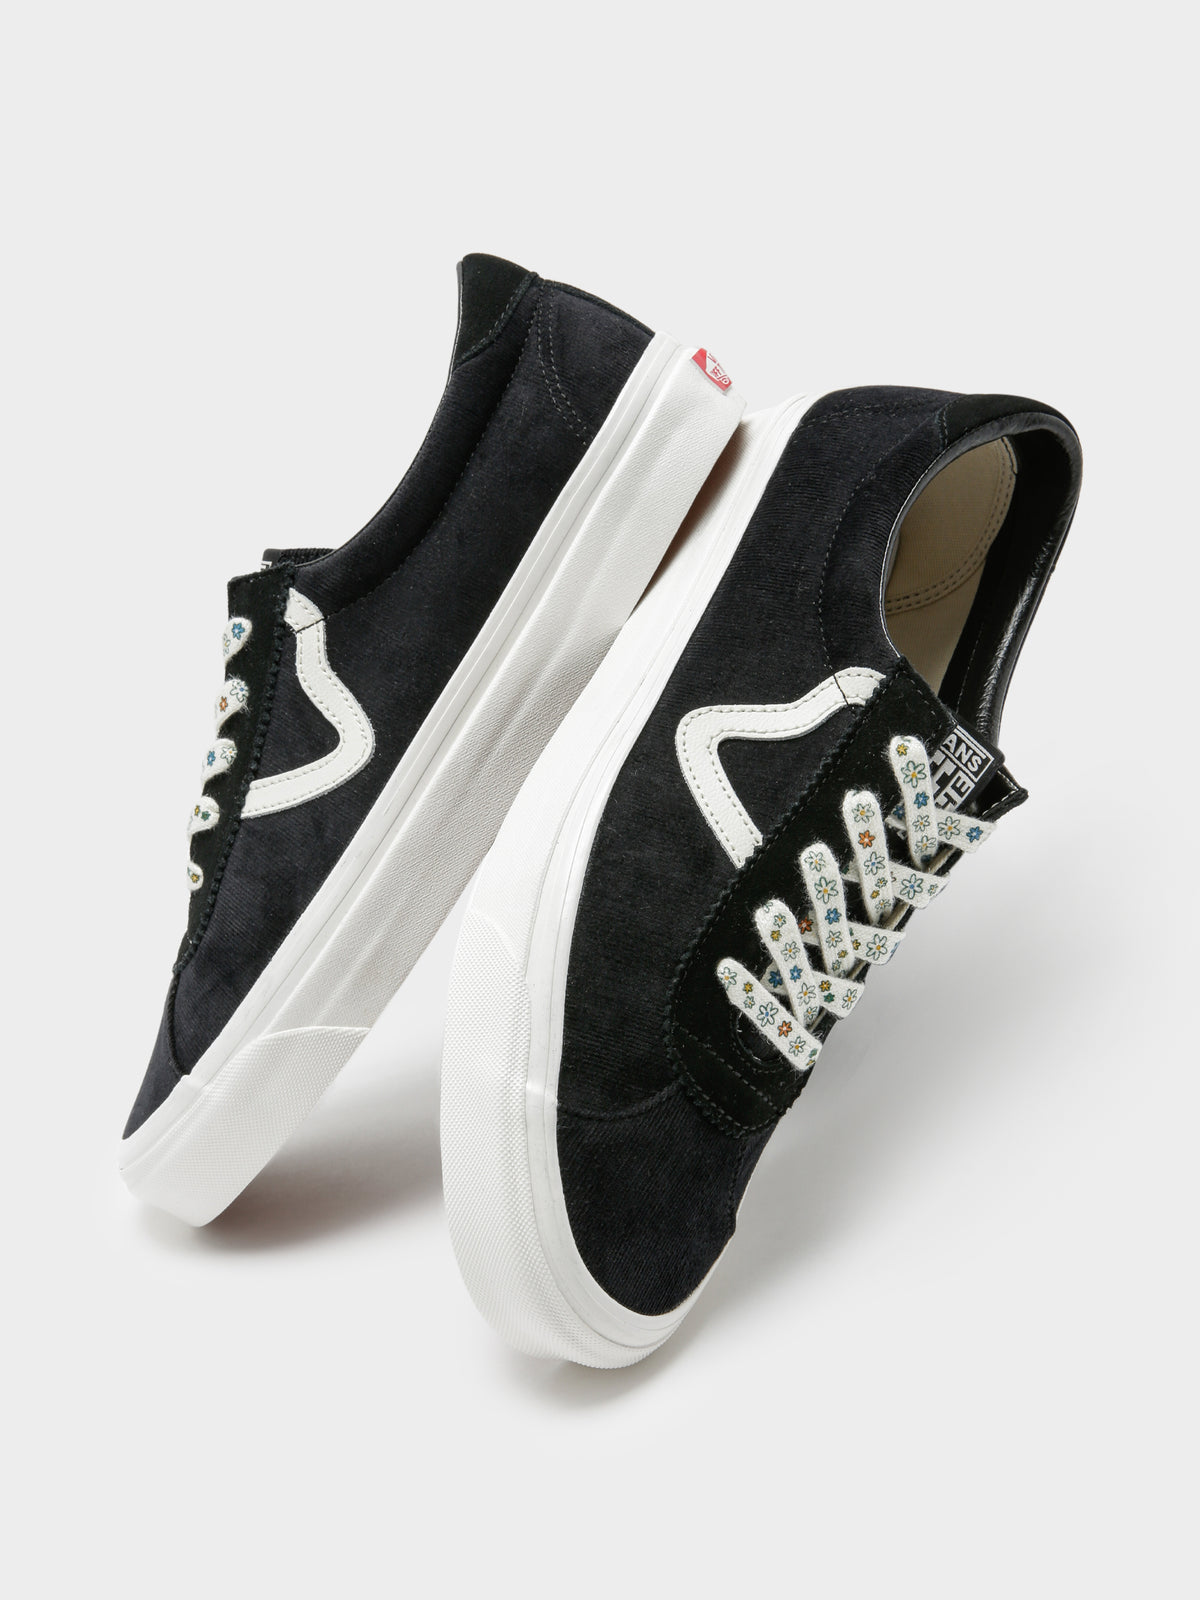 Unisex Style 73 DX Anaheim Sneakers in Black